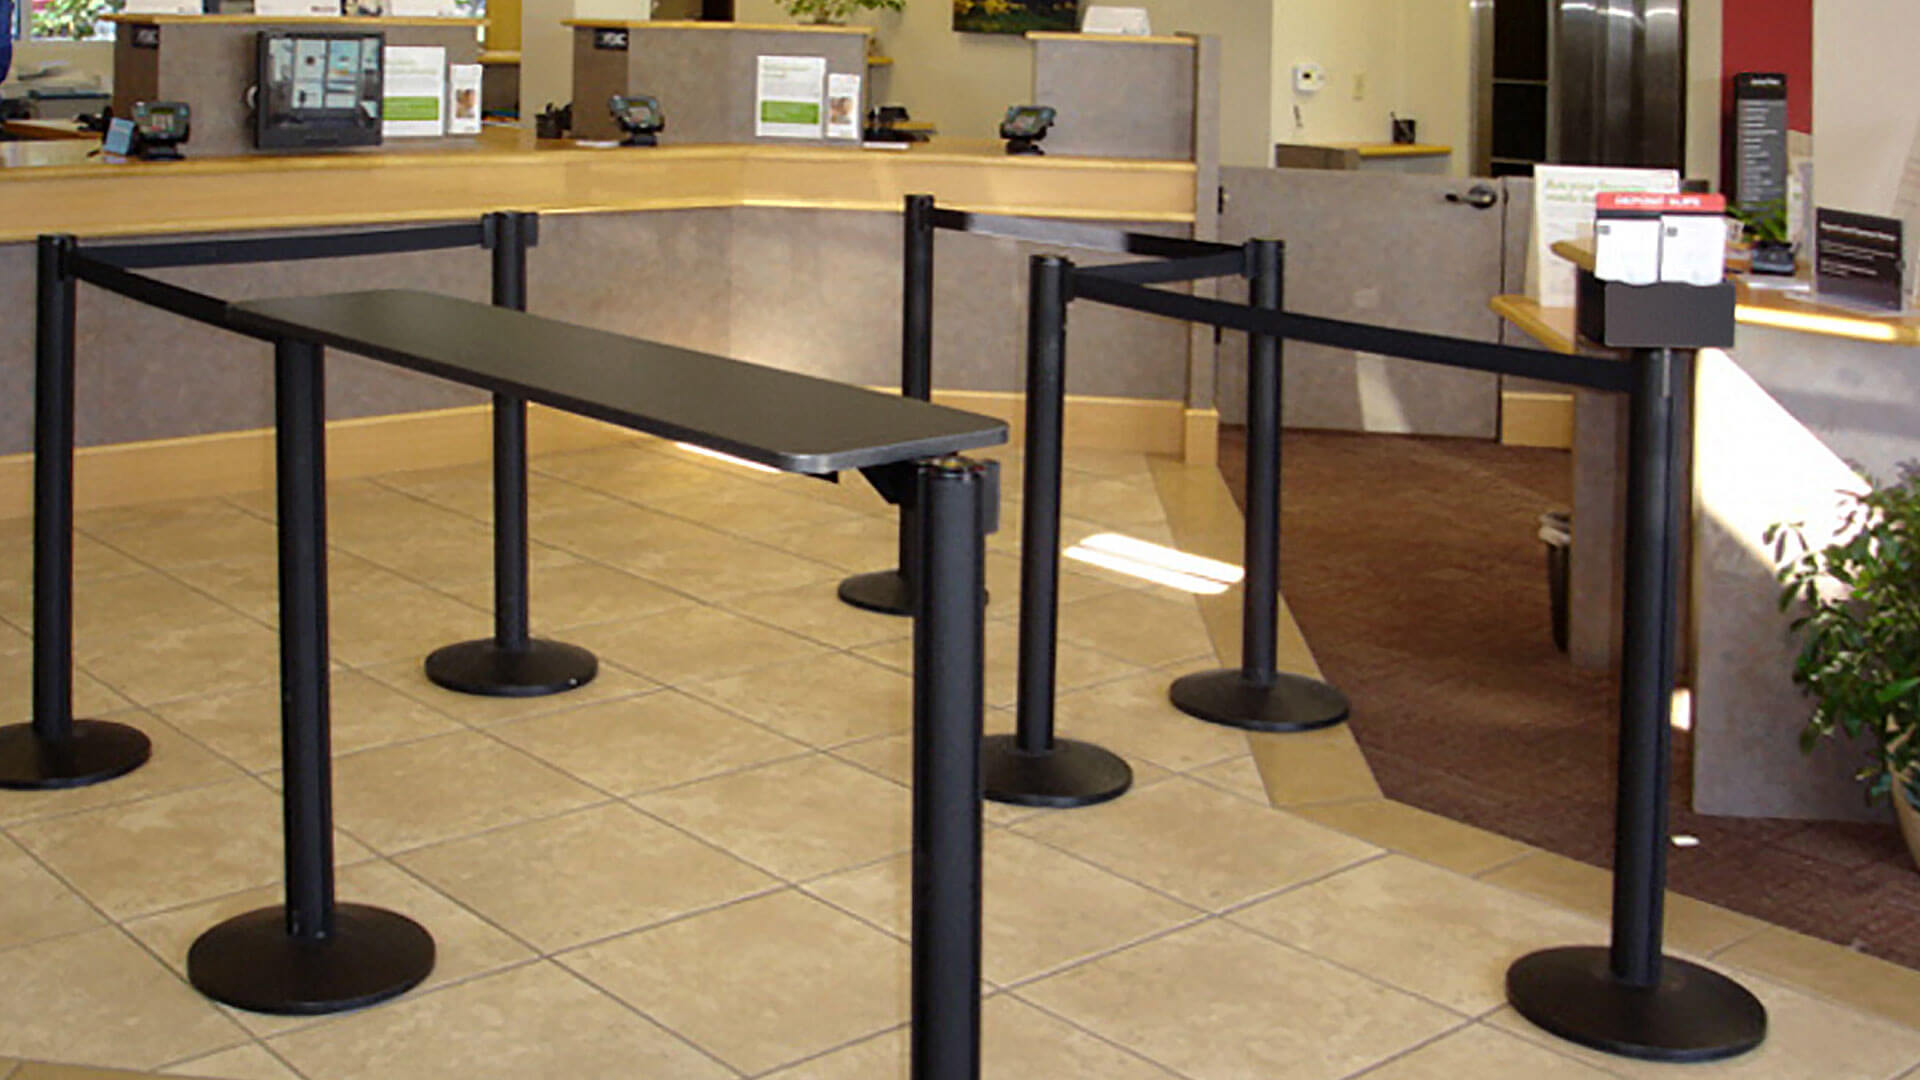 Financial,Queuing,Stanchions,In-LineTable,DepositSlipHolder